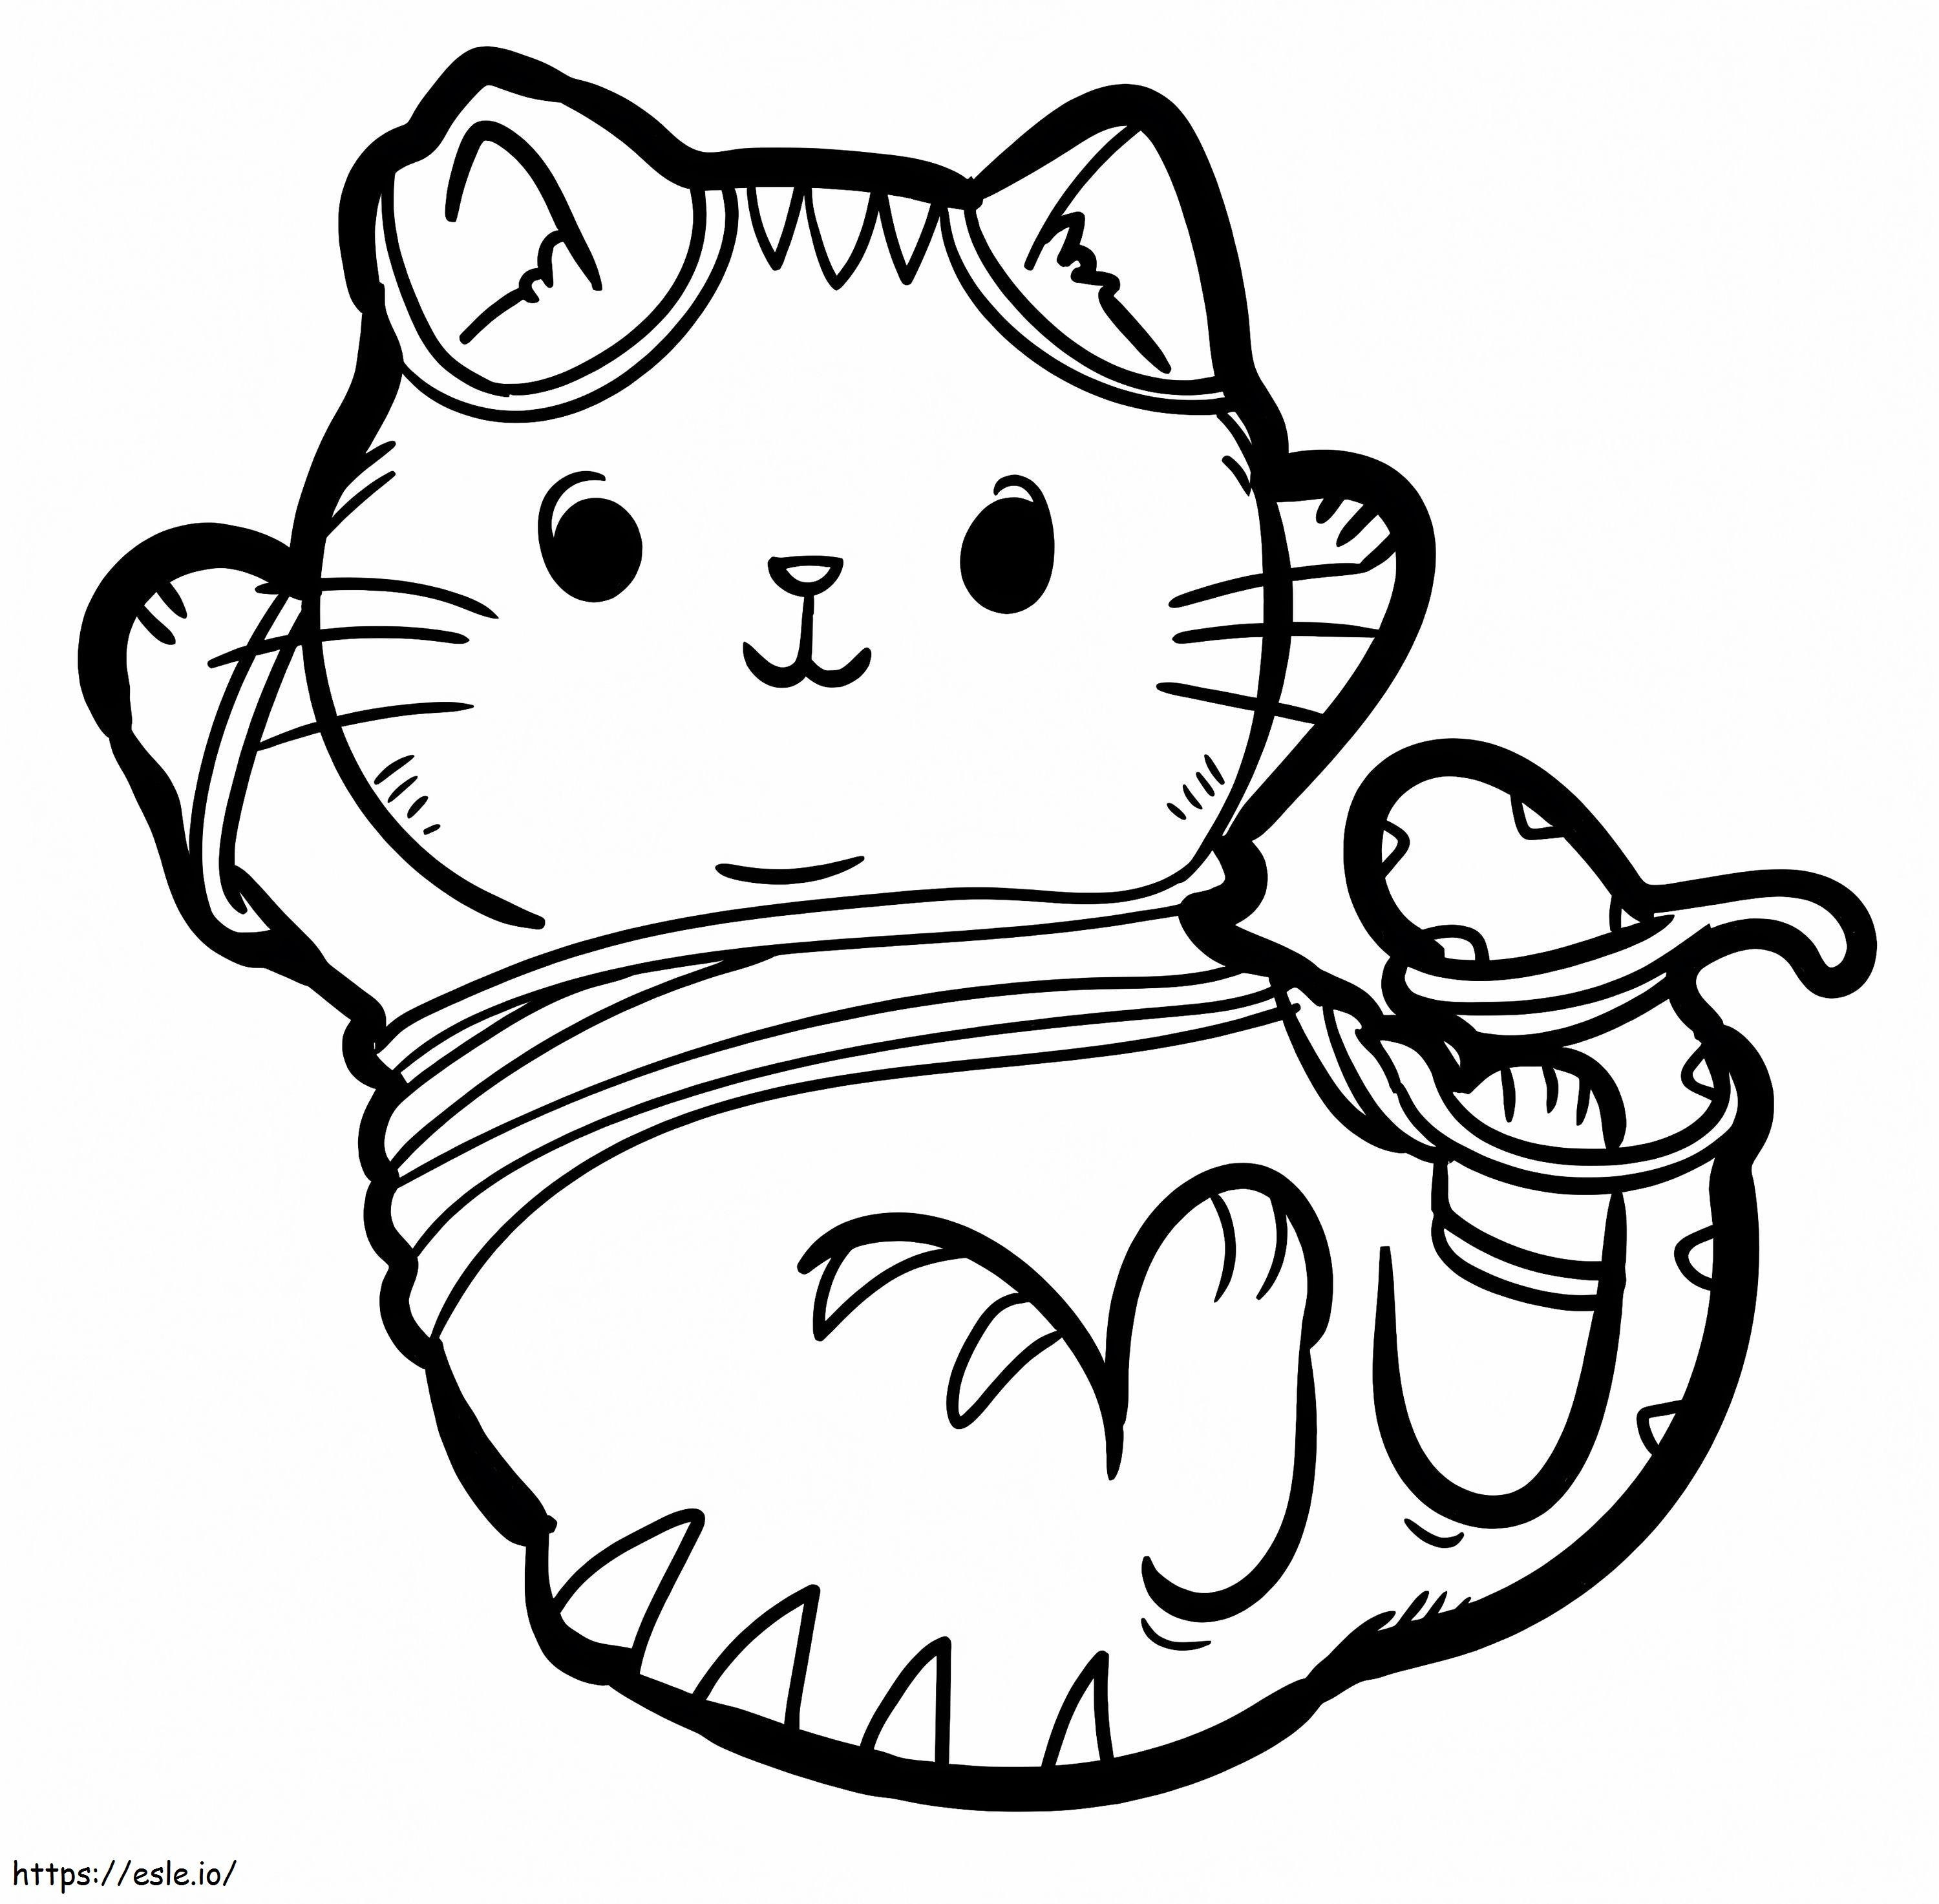 Naughty Kitten coloring page